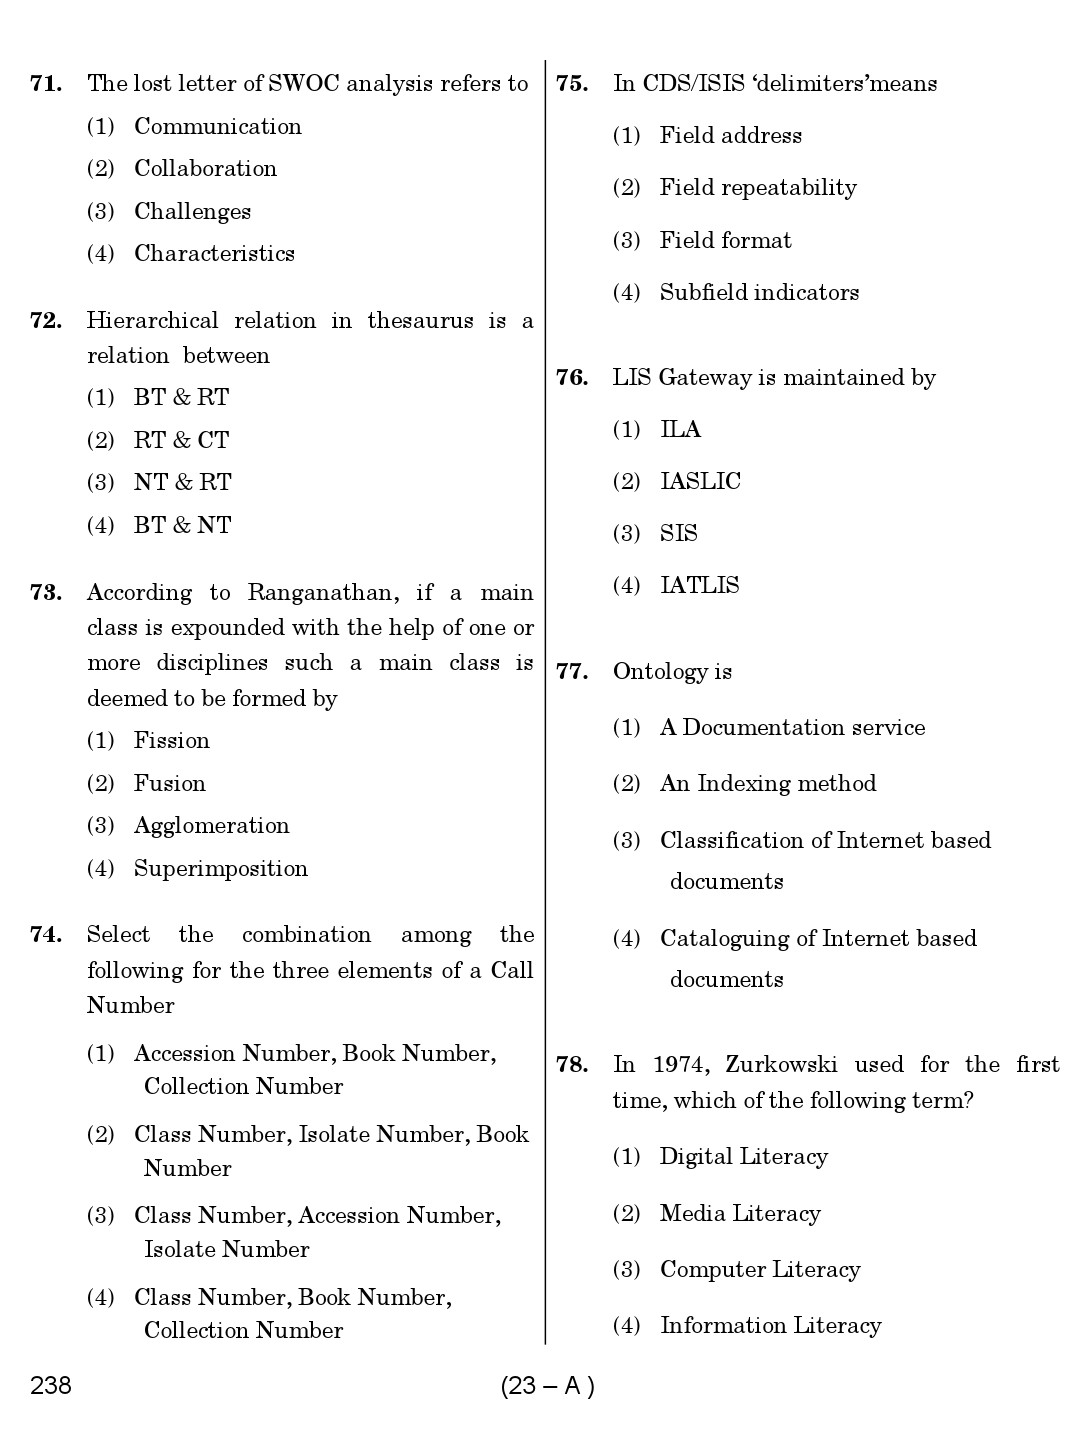 Karnataka PSC 238 Specific Paper II Librarian Exam Sample Question Paper 23